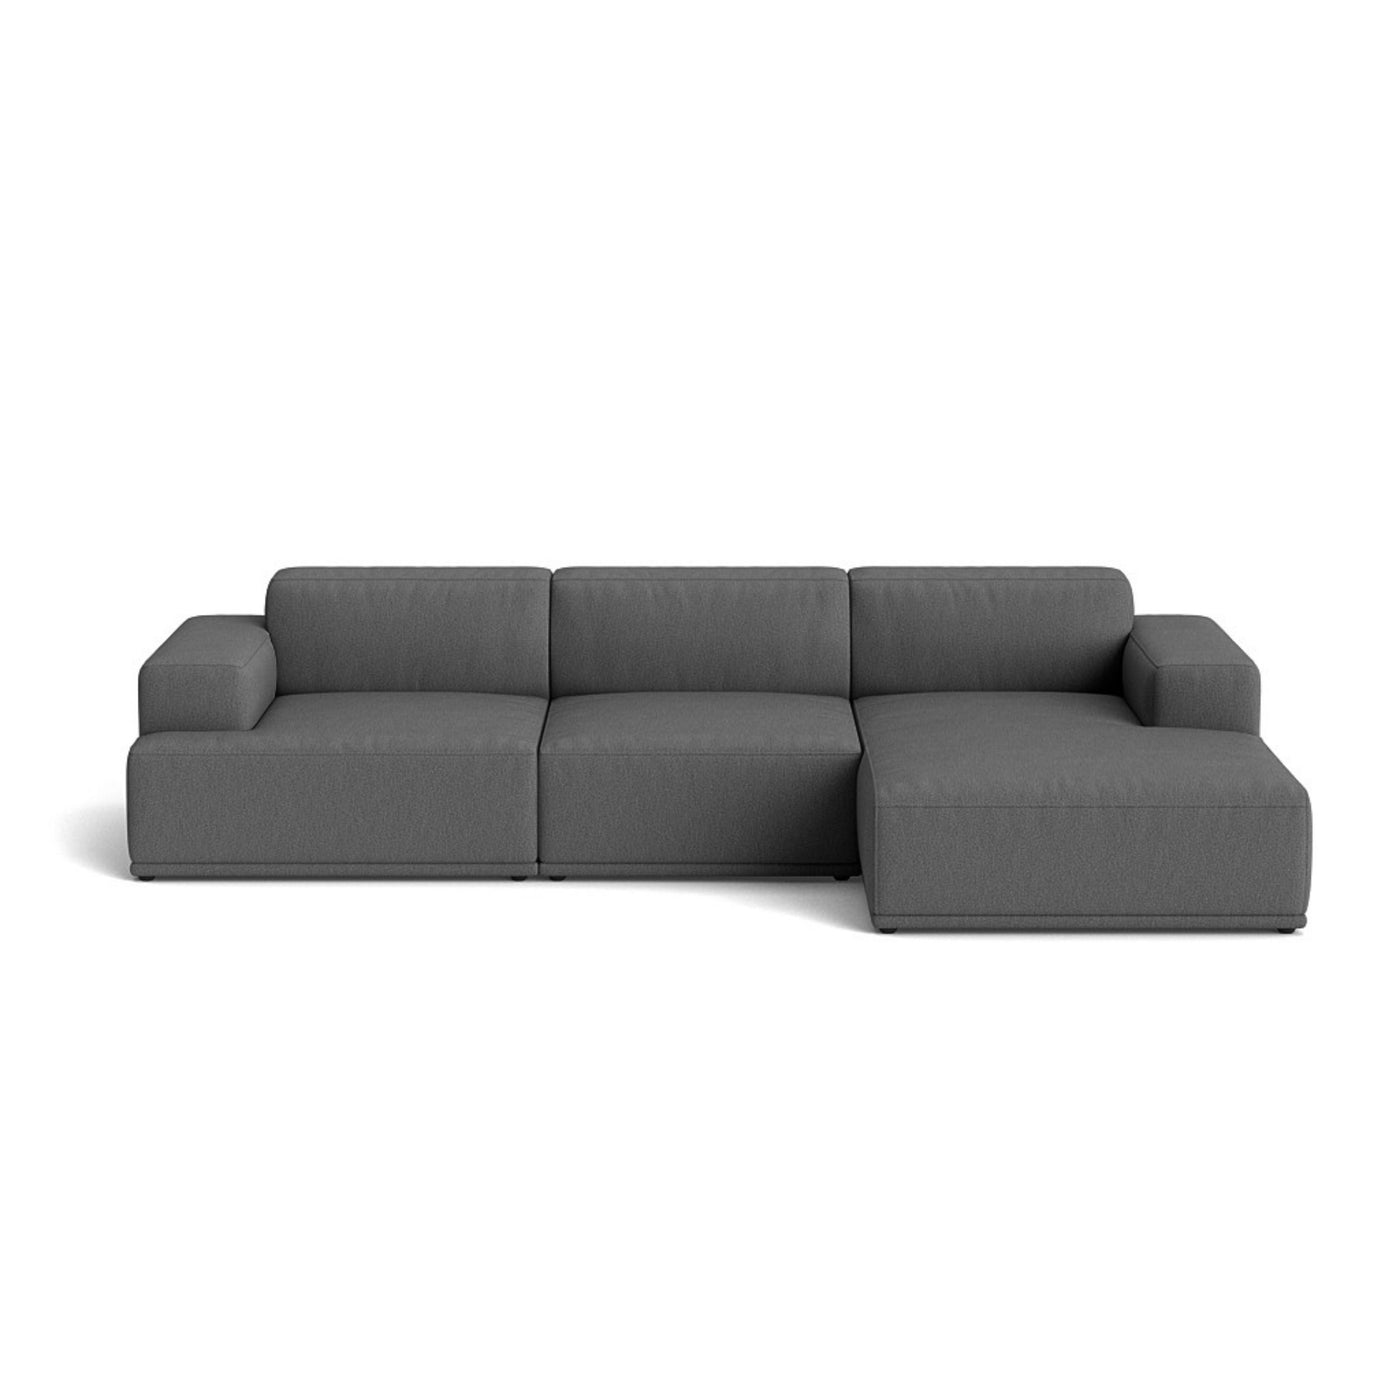 Muuto Connect Soft Modular 3 Seater Sofa, configuration 3. Made-to-order from someday designs. #colour_clay-13